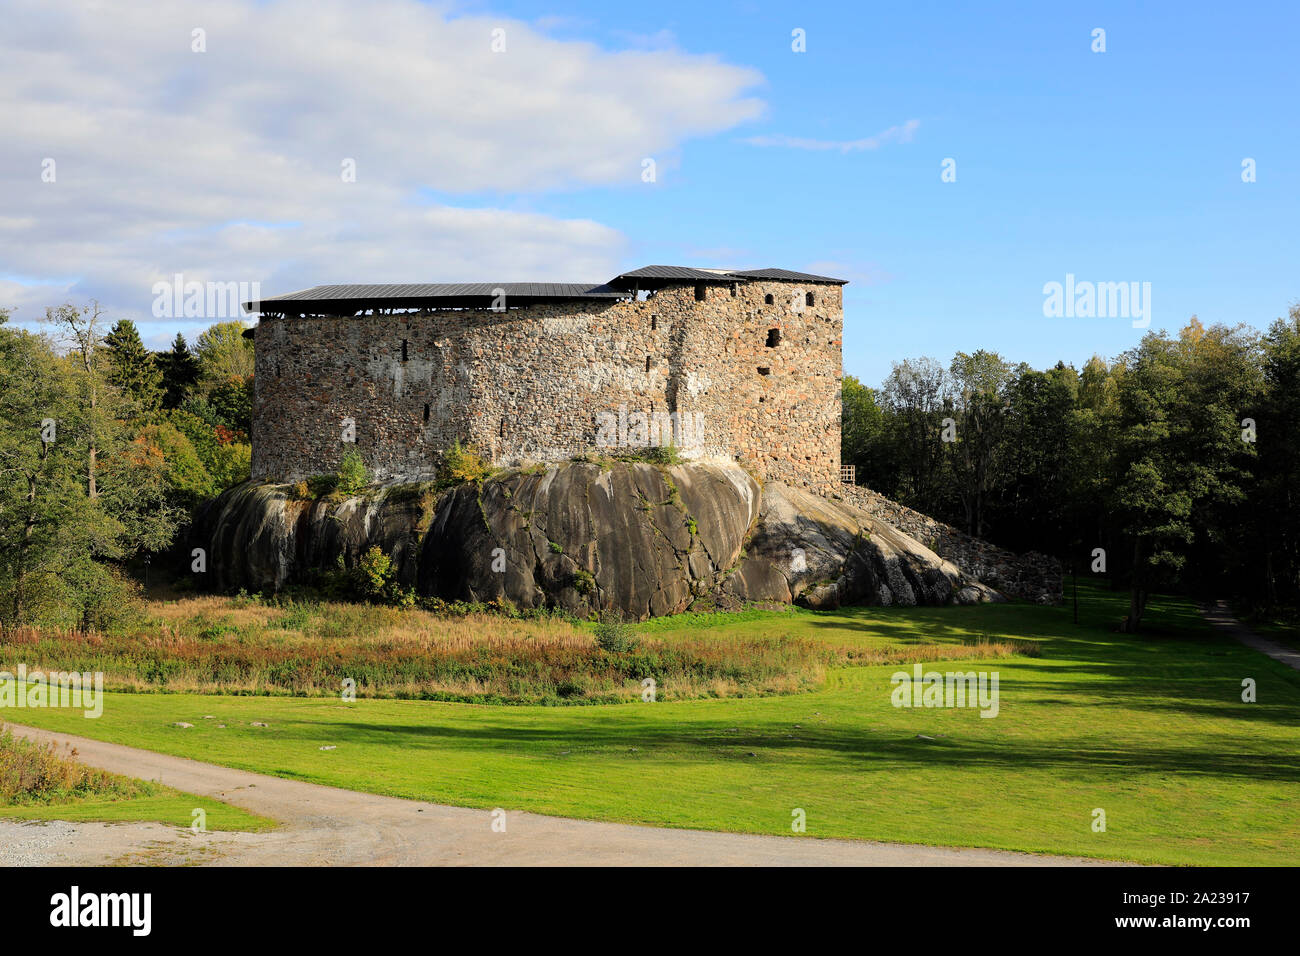 Medieval Raseborg Castle Ruins in autumn. Raseborg Castle was built in 1370s on a rock that was surrounded by water at the time. Snappertuna, Finland. Stock Photo